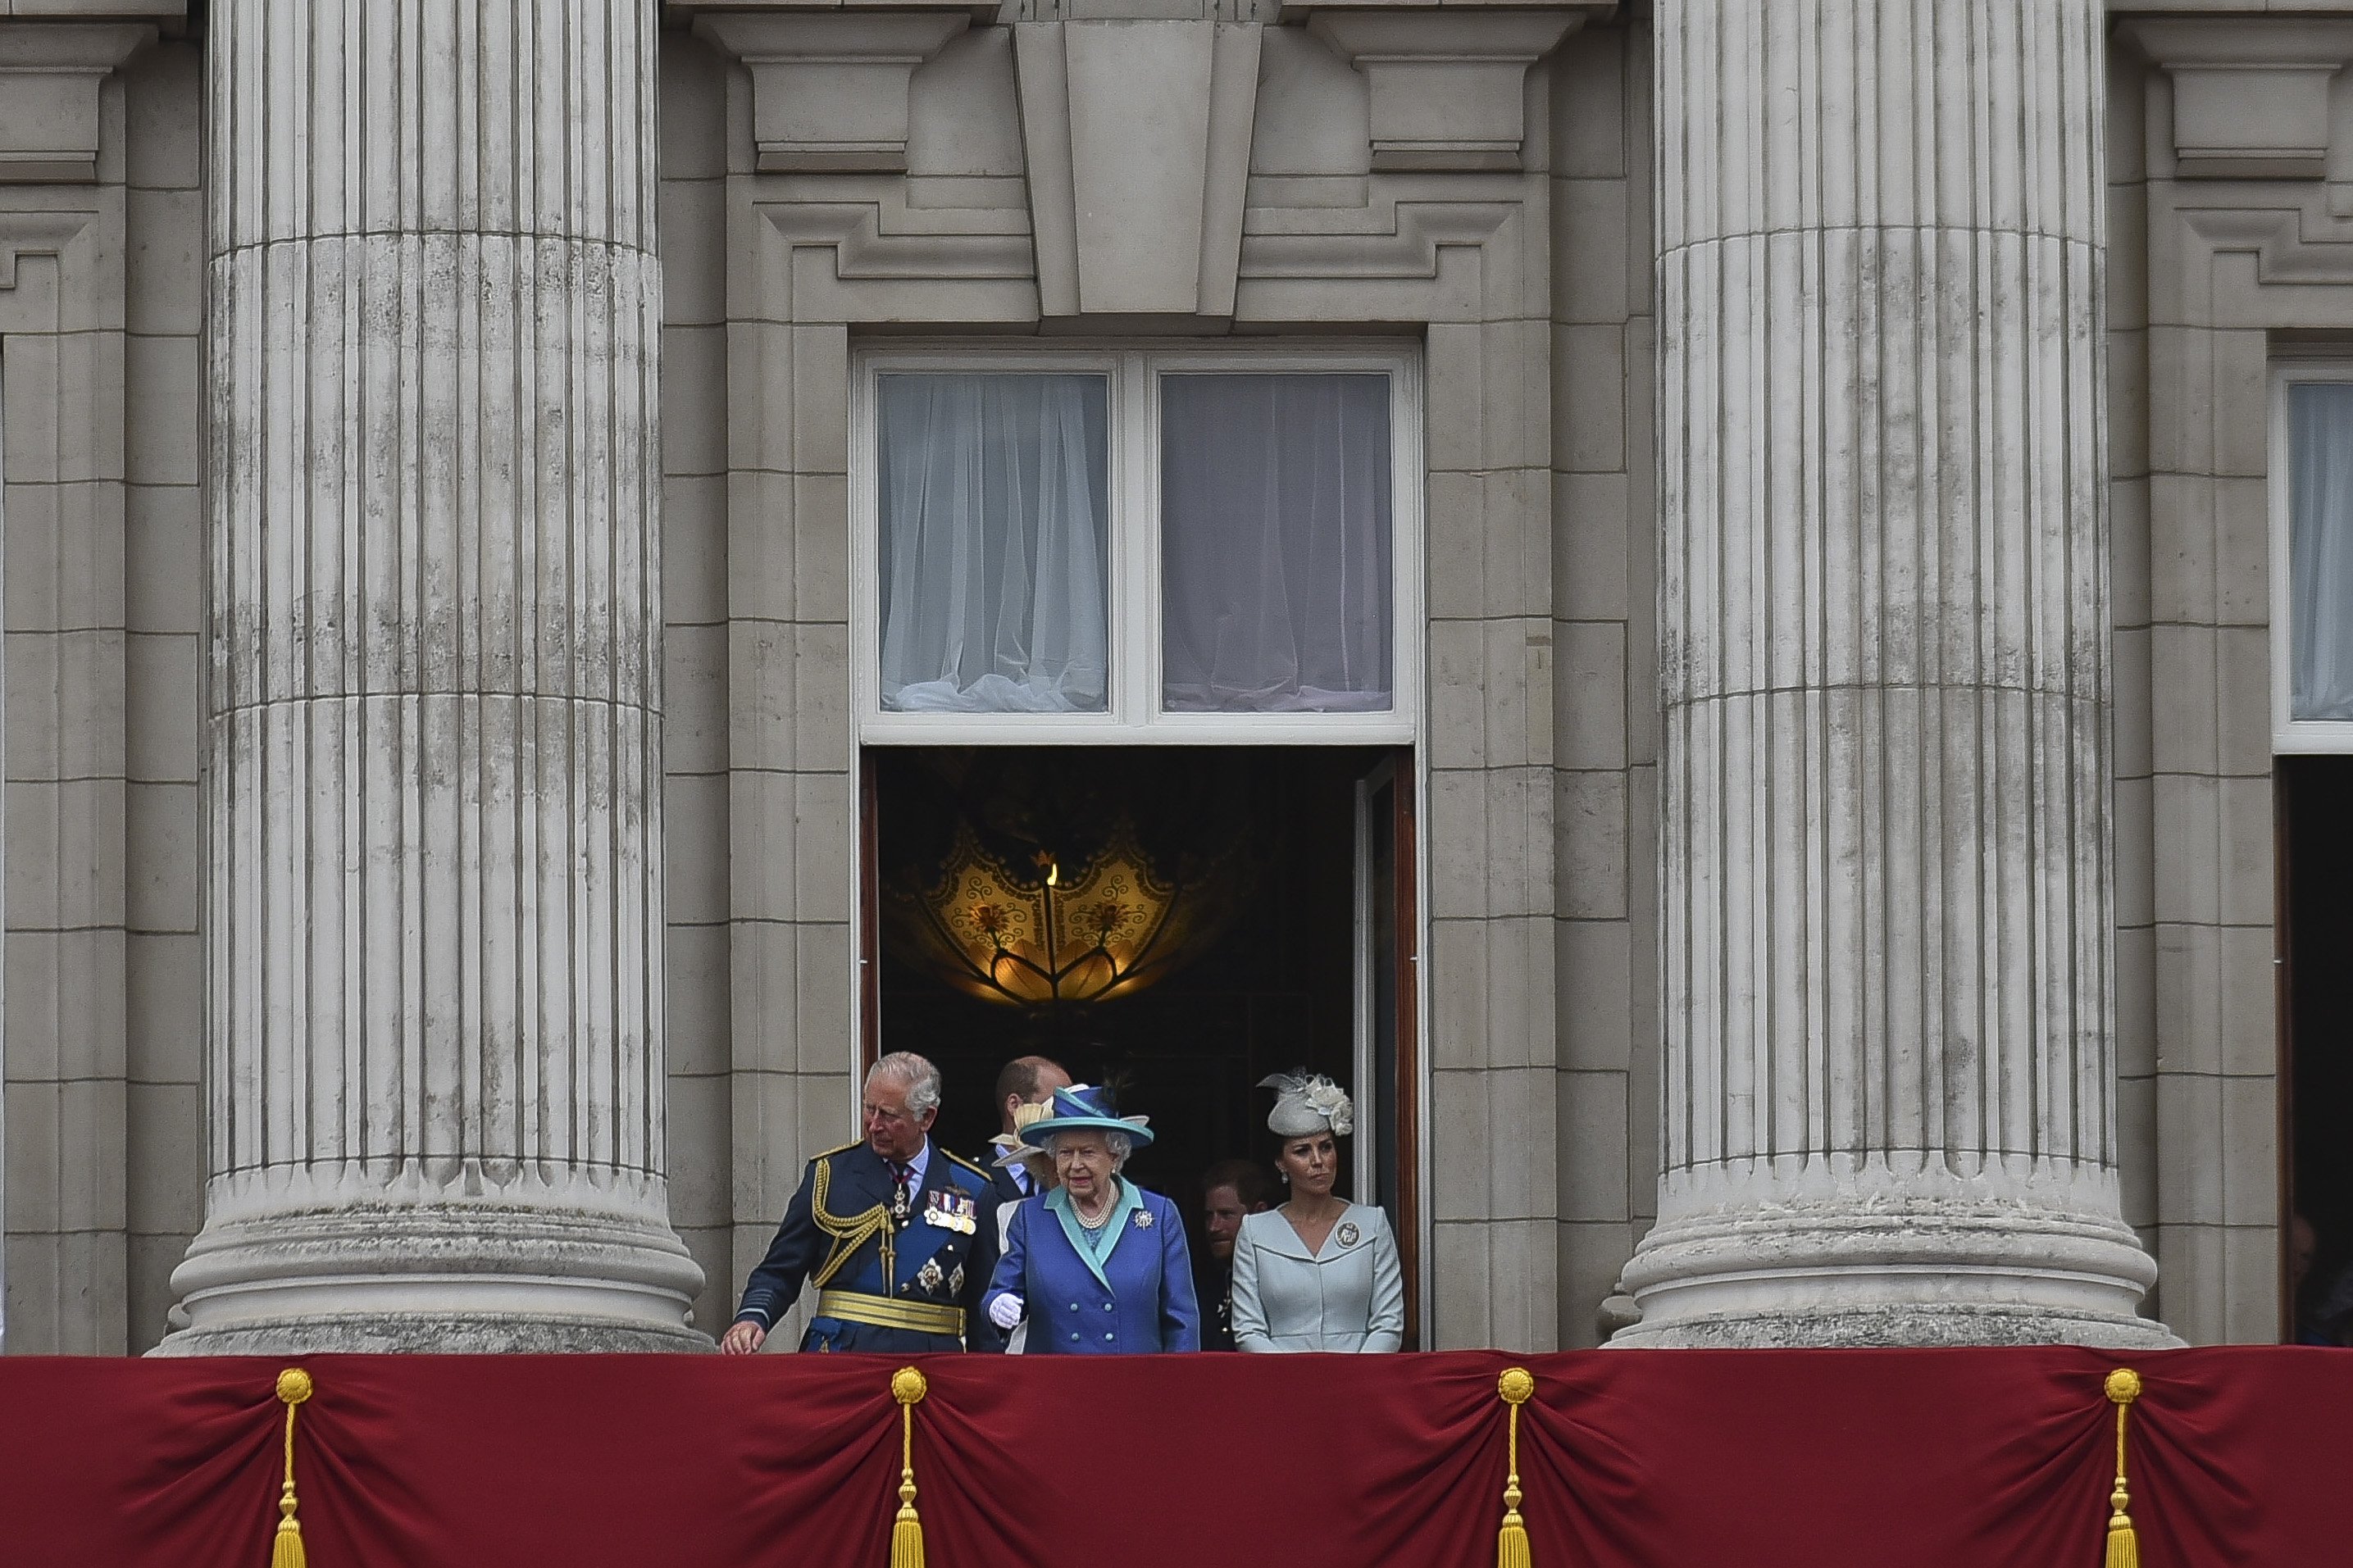 Queen Elizabeth II pictured arriving with other members of the Royal Family onto the balcony of Buckingham Palace to watch a military fly-past to mark the centenary of the Royal Air Force (RAF) on July 10, 2018 in London, England. / Source: Getty Images